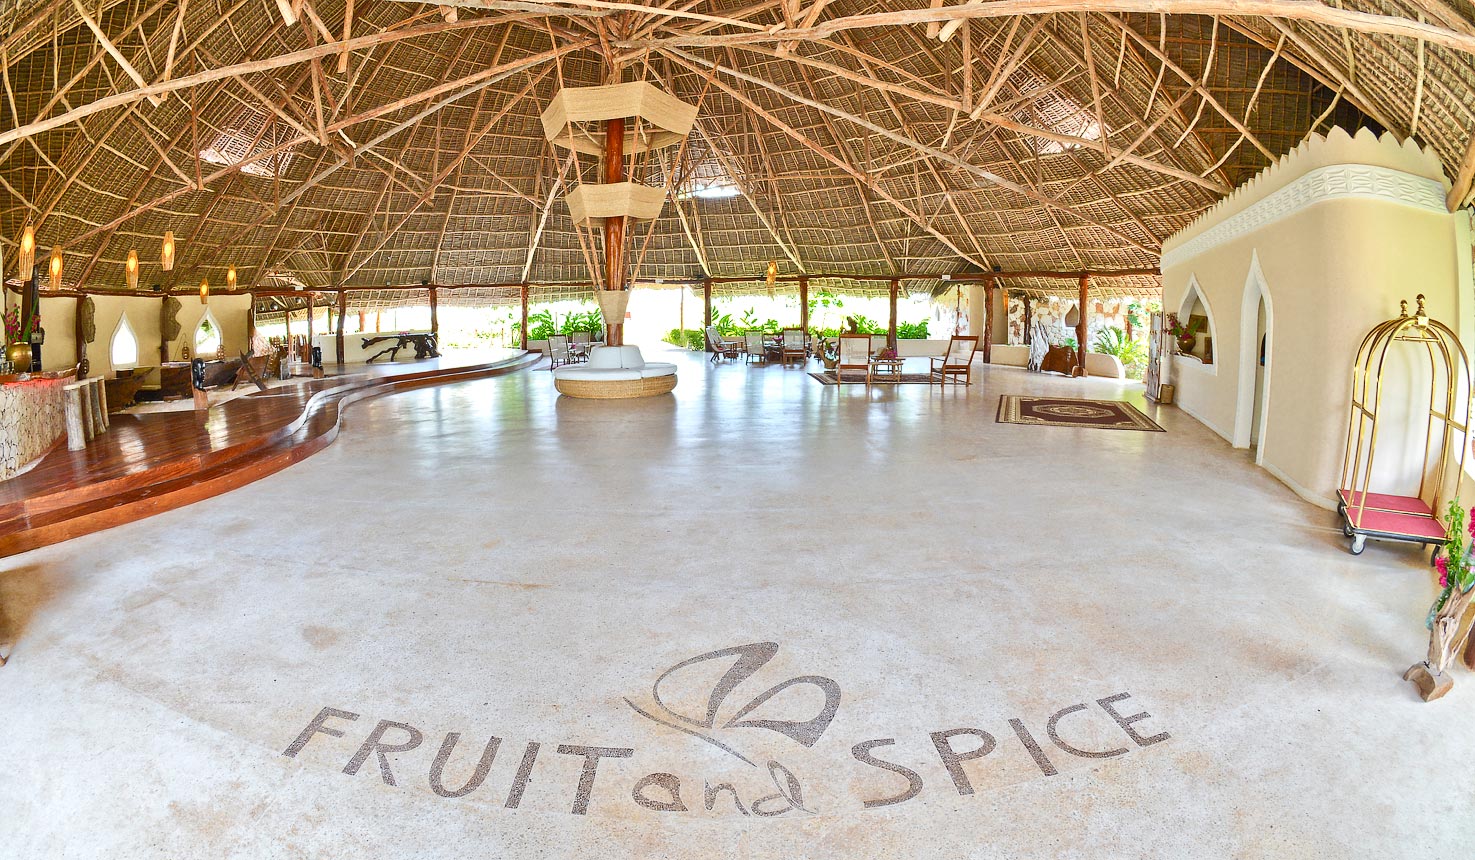 Fruit and Spice, Resort Image 1